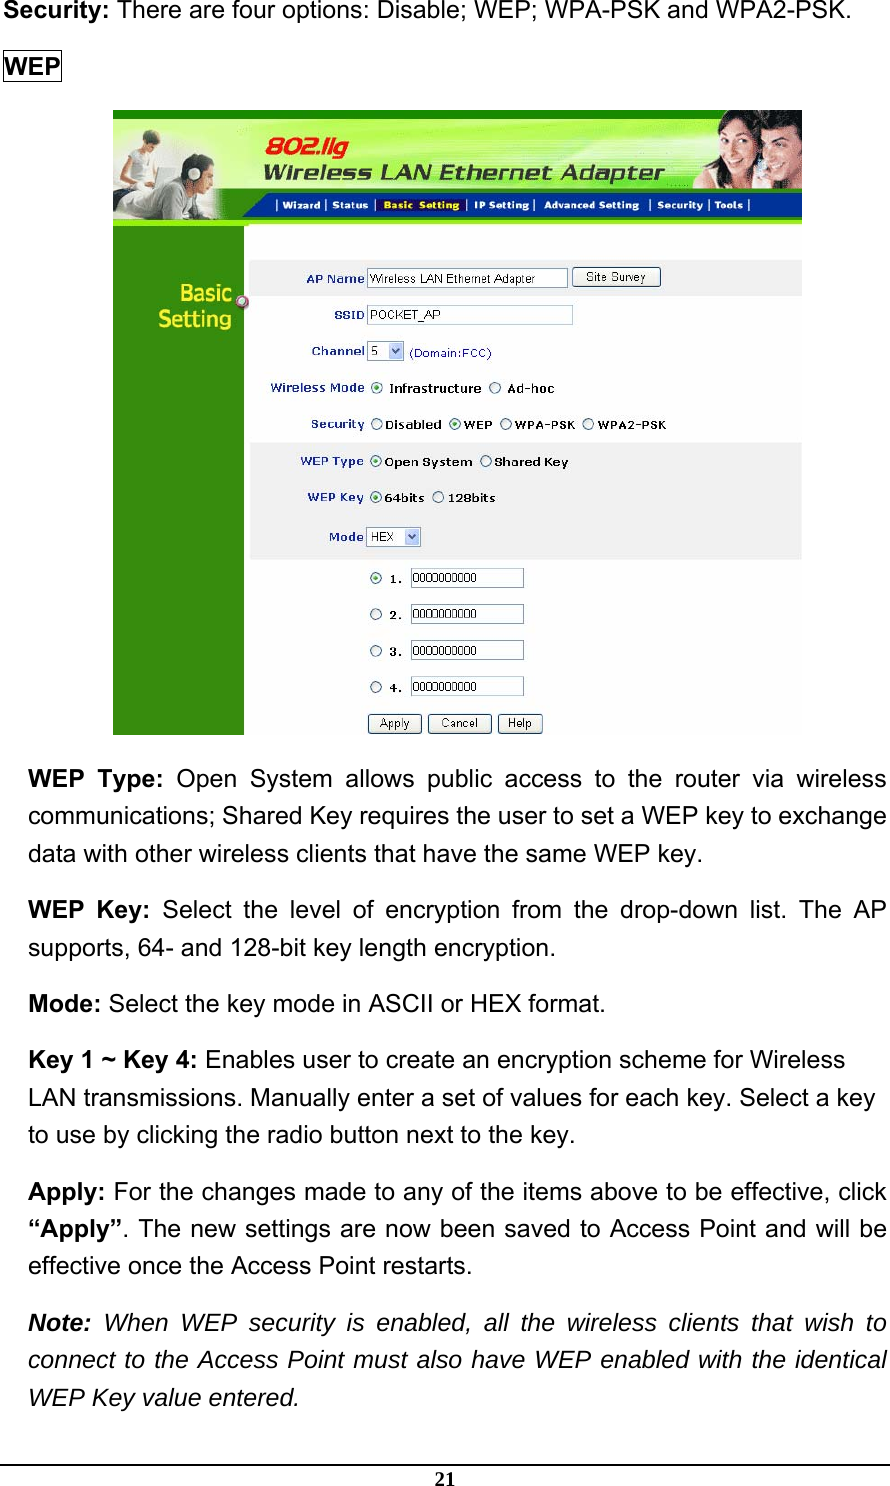 21 Security: There are four options: Disable; WEP; WPA-PSK and WPA2-PSK.     WEP  WEP Type: Open System allows public access to the router via wireless communications; Shared Key requires the user to set a WEP key to exchange data with other wireless clients that have the same WEP key. WEP Key: Select the level of encryption from the drop-down list. The AP supports, 64- and 128-bit key length encryption. Mode: Select the key mode in ASCII or HEX format. Key 1 ~ Key 4: Enables user to create an encryption scheme for Wireless LAN transmissions. Manually enter a set of values for each key. Select a key to use by clicking the radio button next to the key. Apply: For the changes made to any of the items above to be effective, click “Apply”. The new settings are now been saved to Access Point and will be effective once the Access Point restarts. Note: When WEP security is enabled, all the wireless clients that wish to connect to the Access Point must also have WEP enabled with the identical WEP Key value entered. 